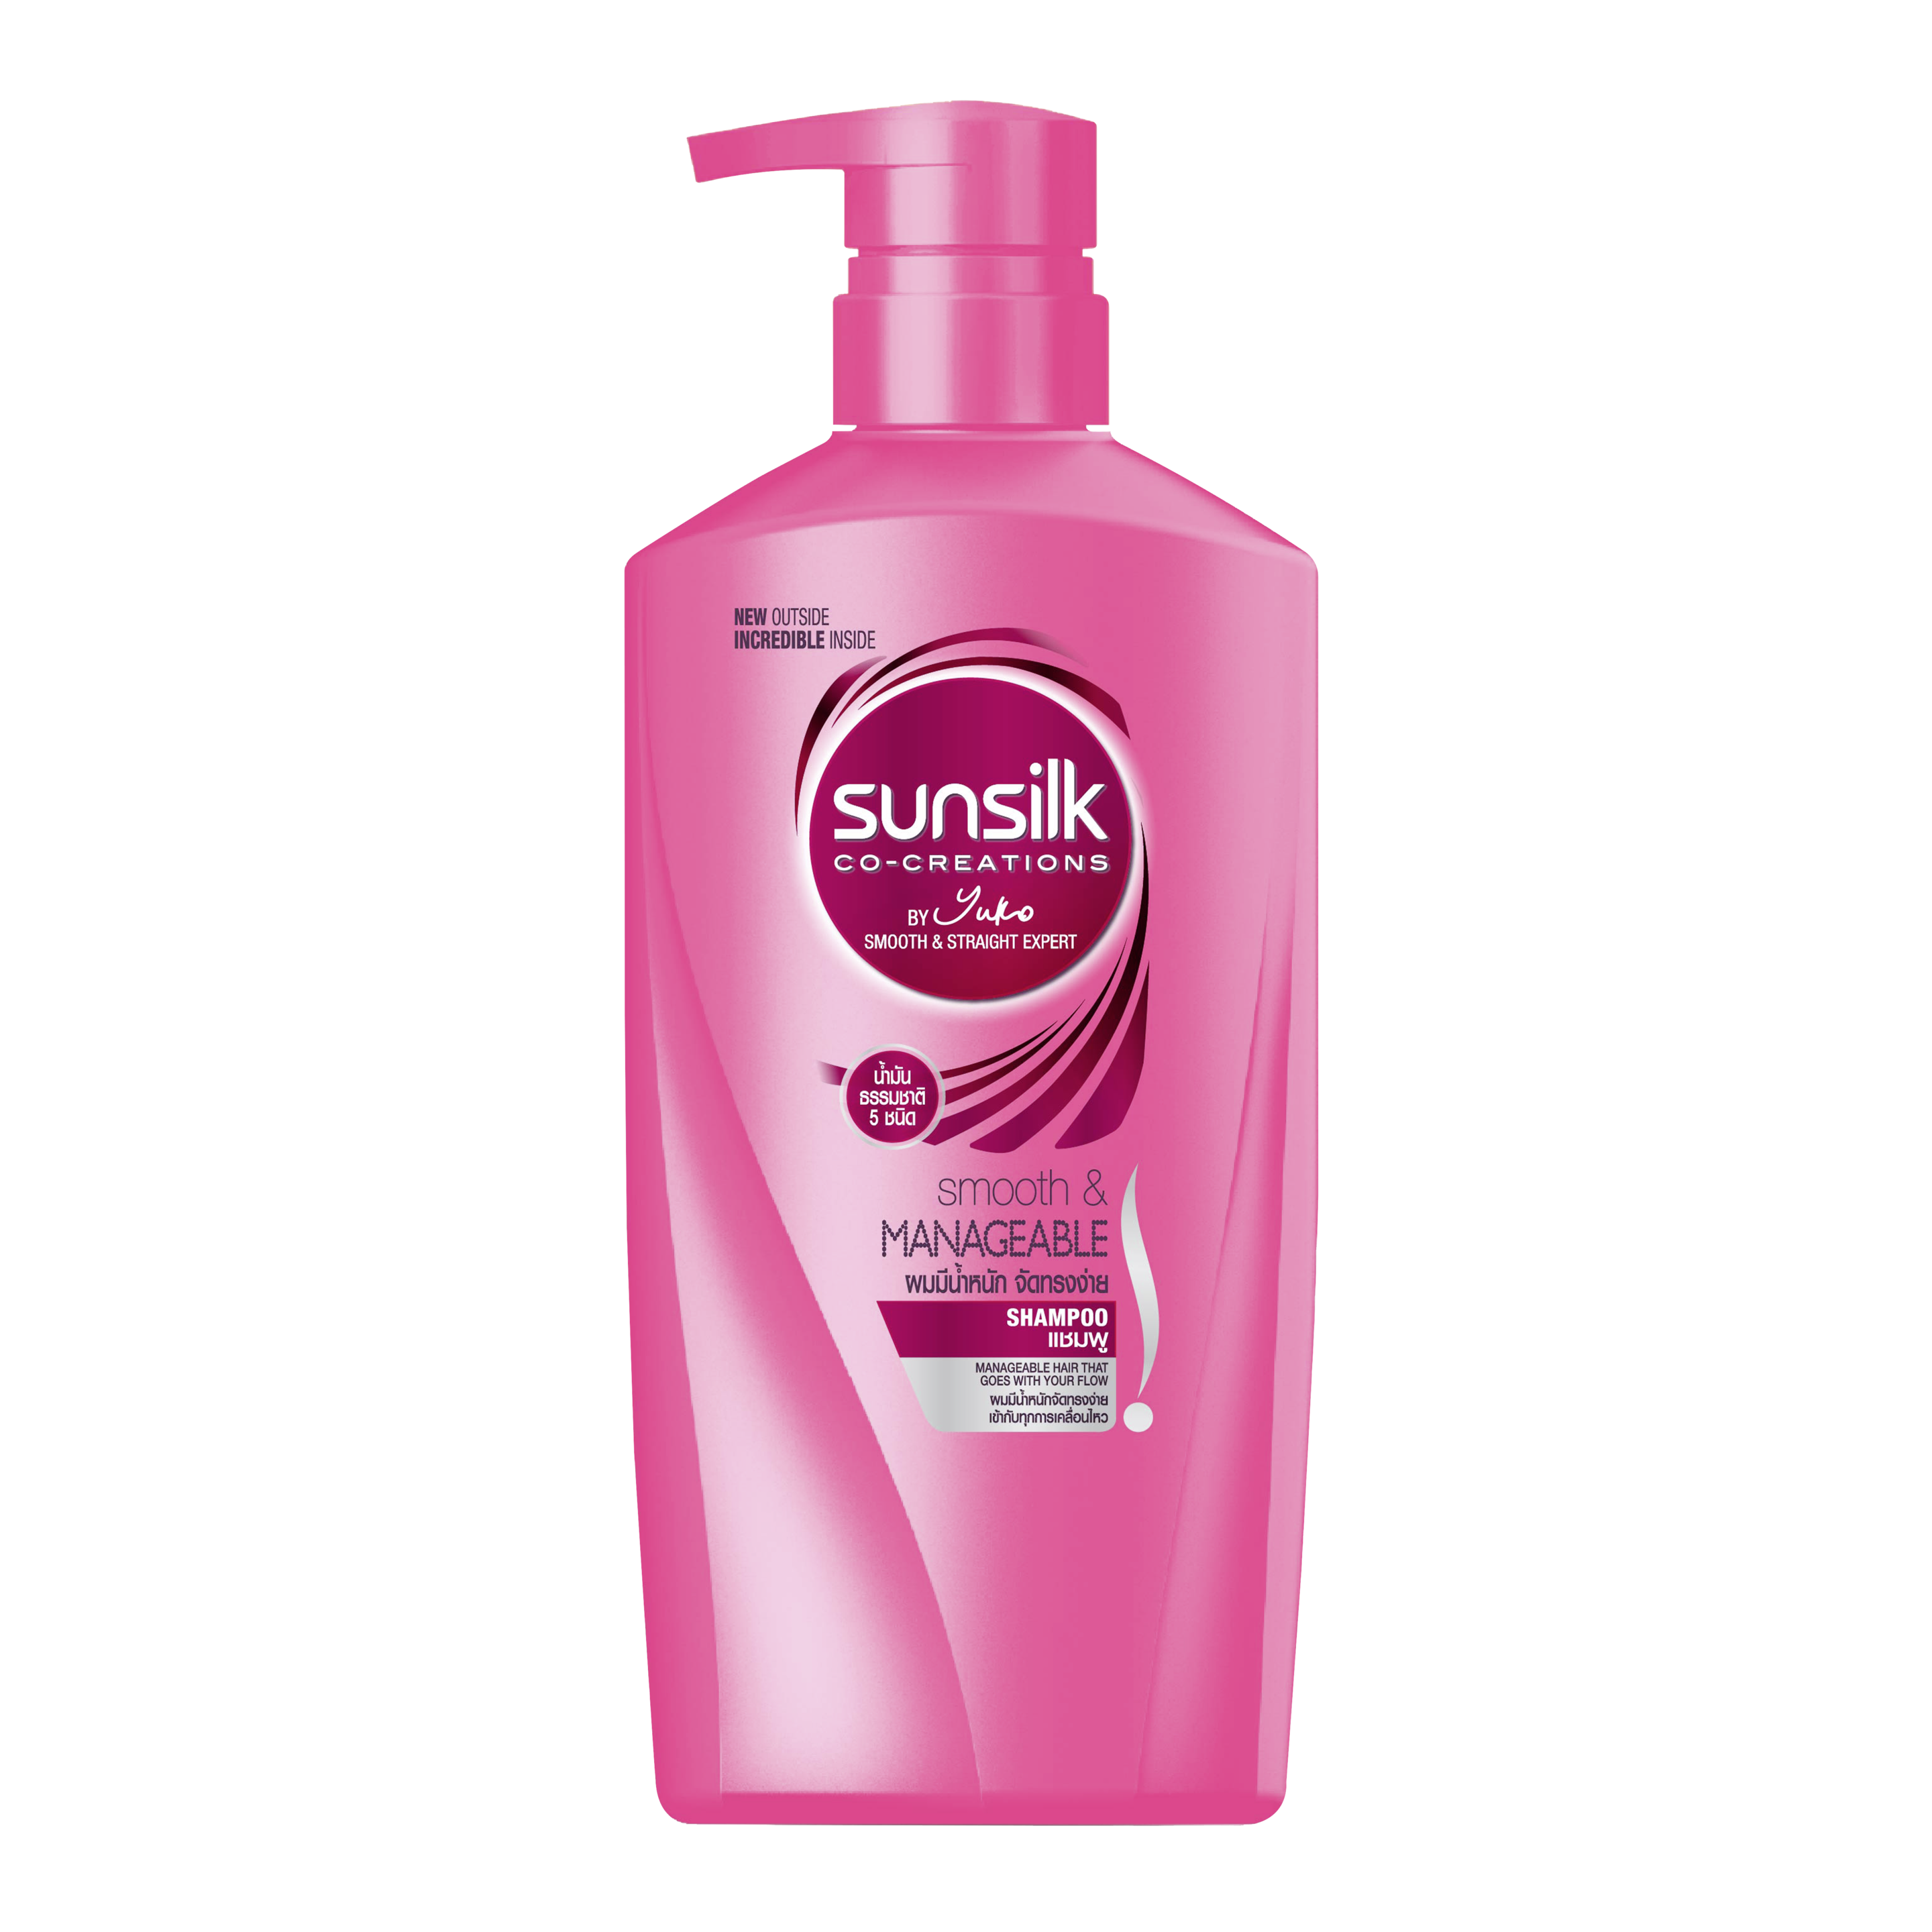 Sunsilk Smooth and Manageable Shampoo 650ml front of pack image